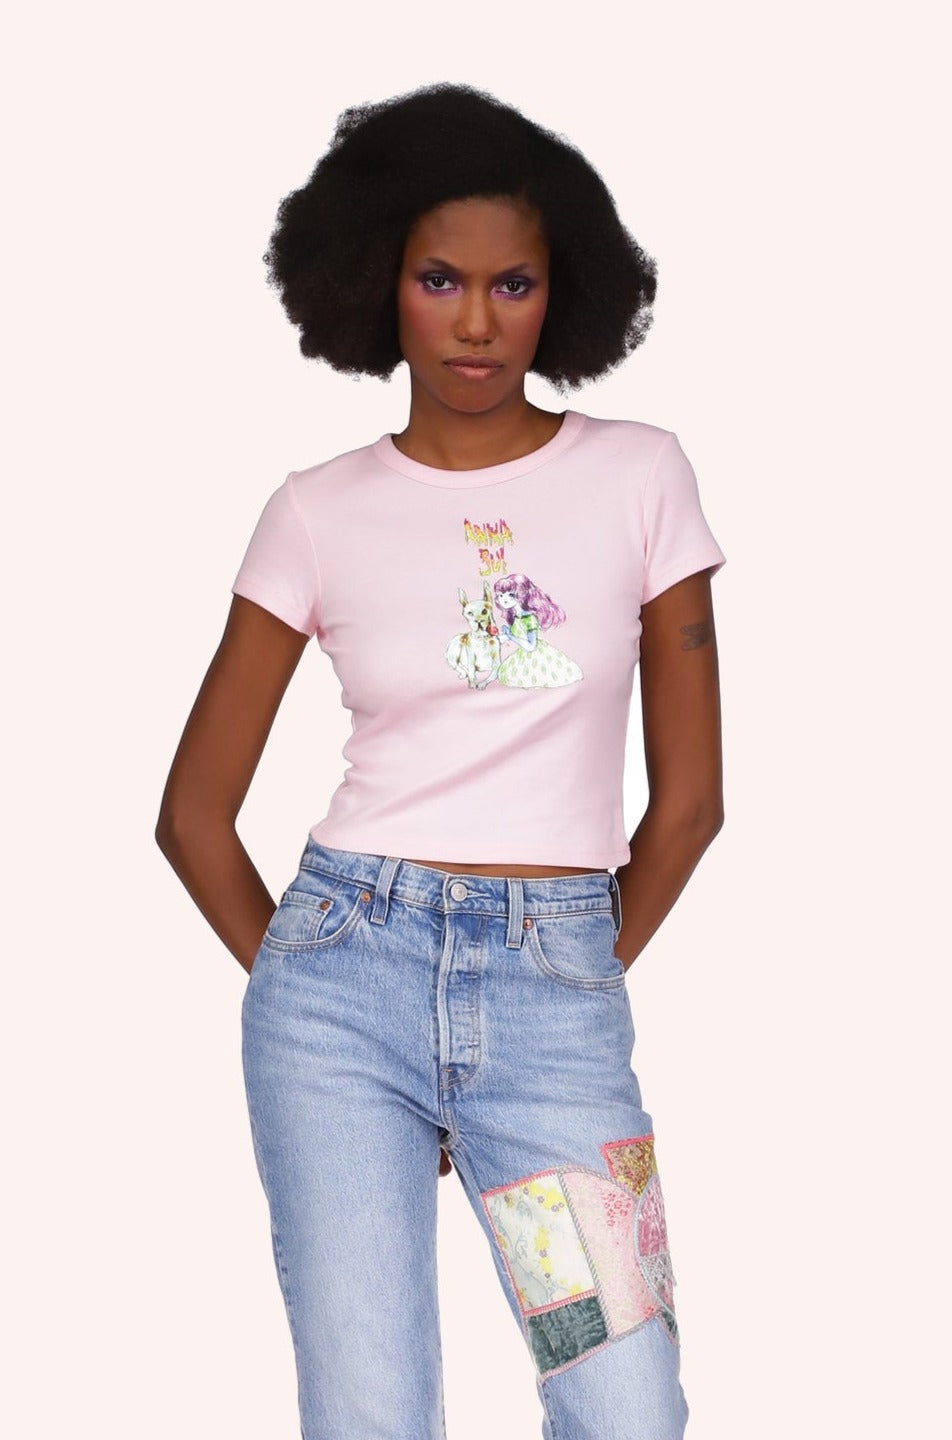 Tee Pink, Short-sleeved, above-the-hips tee that leave a gap between the shirt and a skirt or jeans